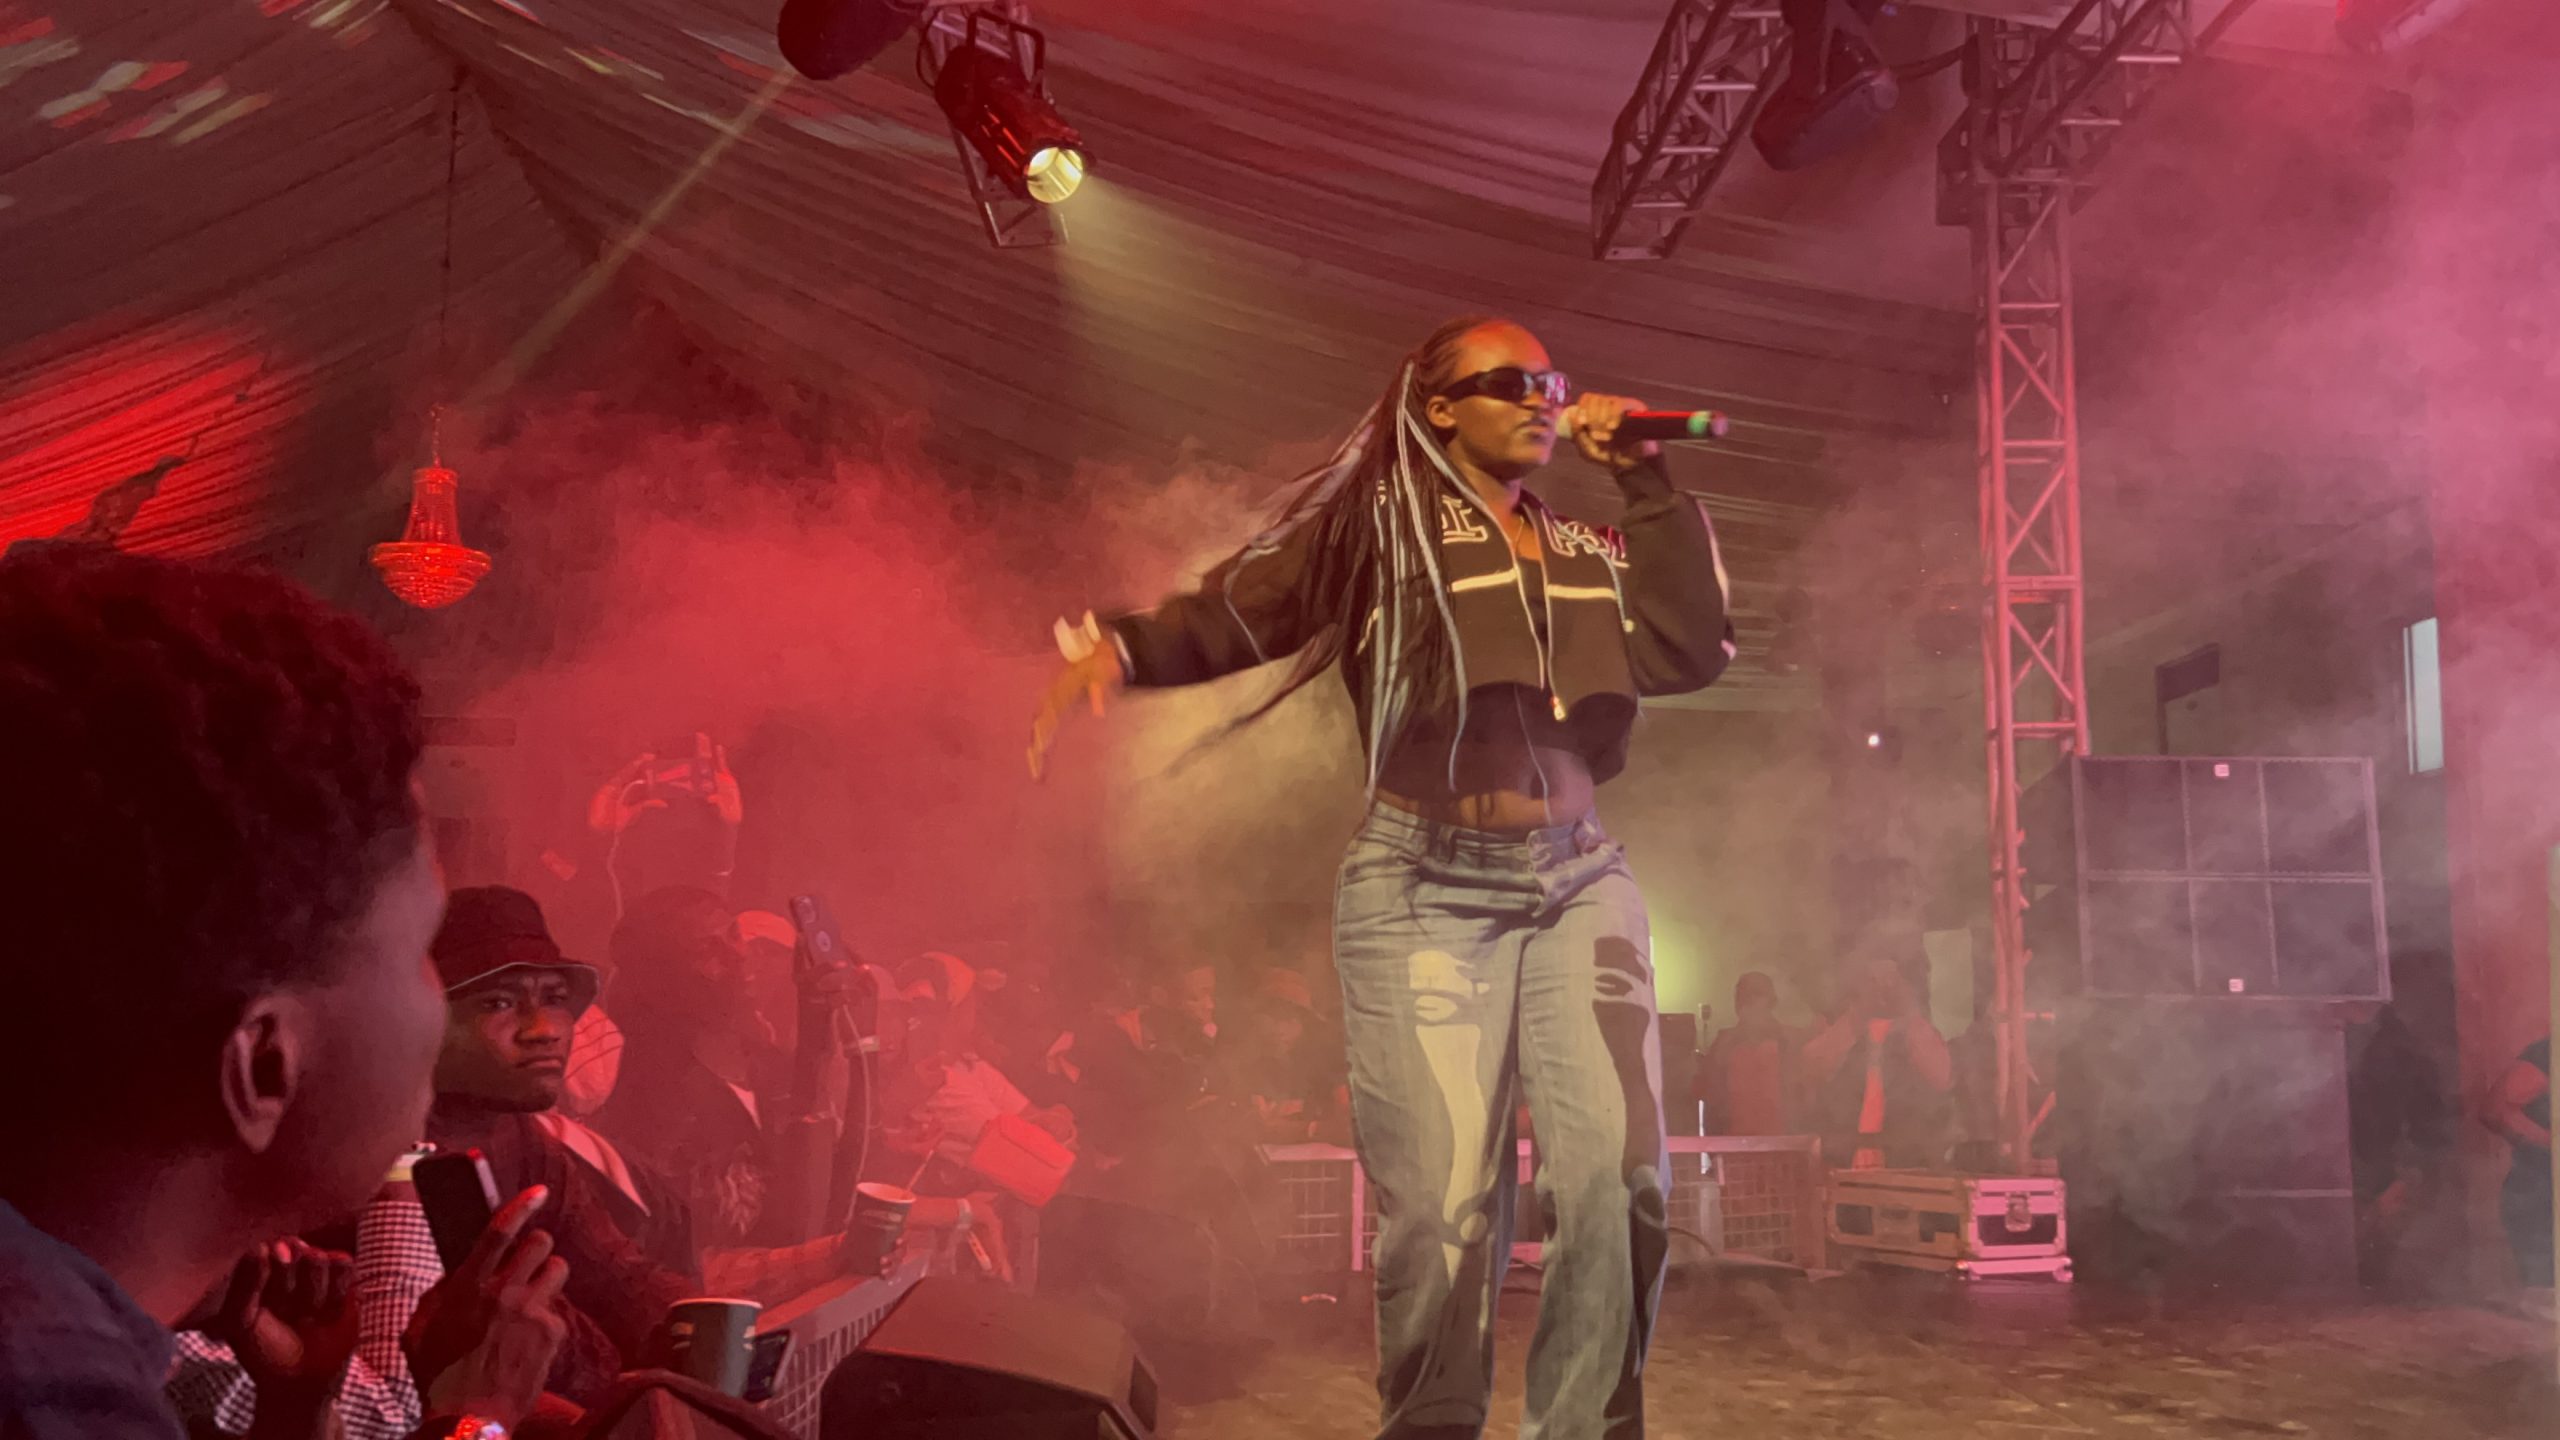 Rebel thrilling fans at Lagos Homecoming Festival